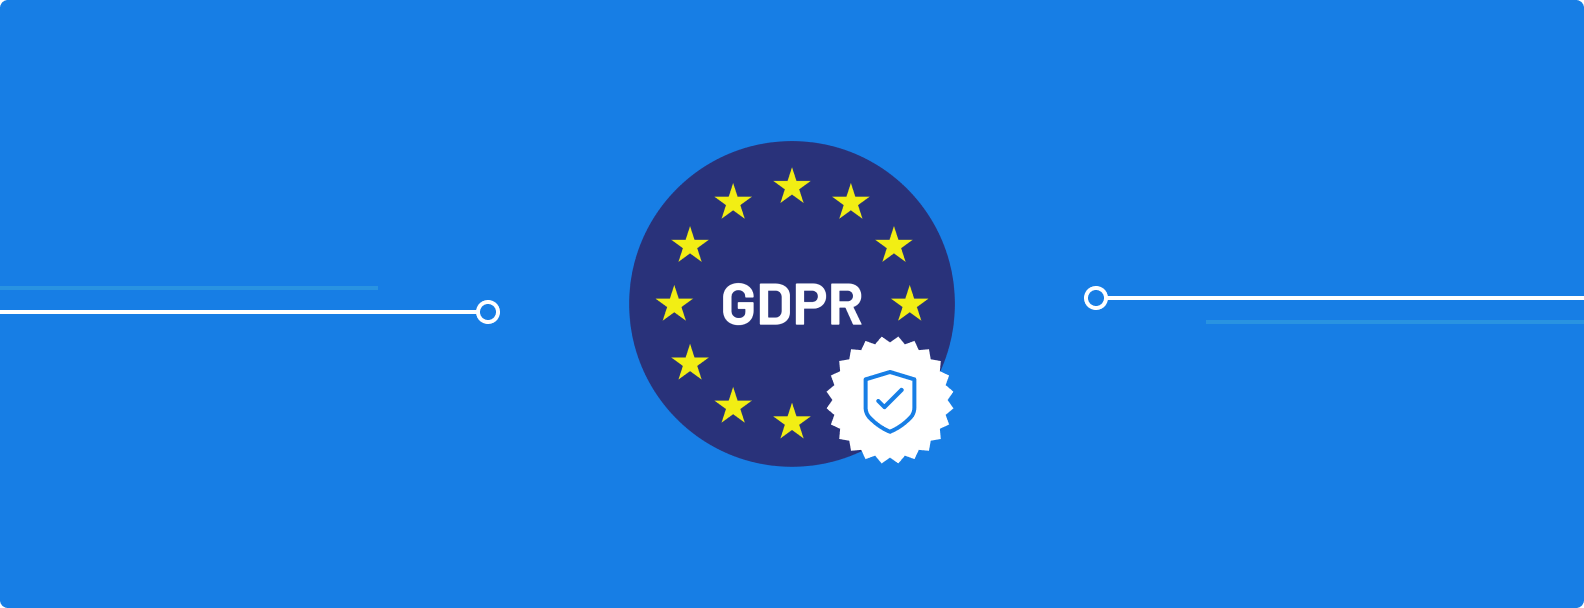 Verify and Maintain GDPR Compliance Quickly and Securely